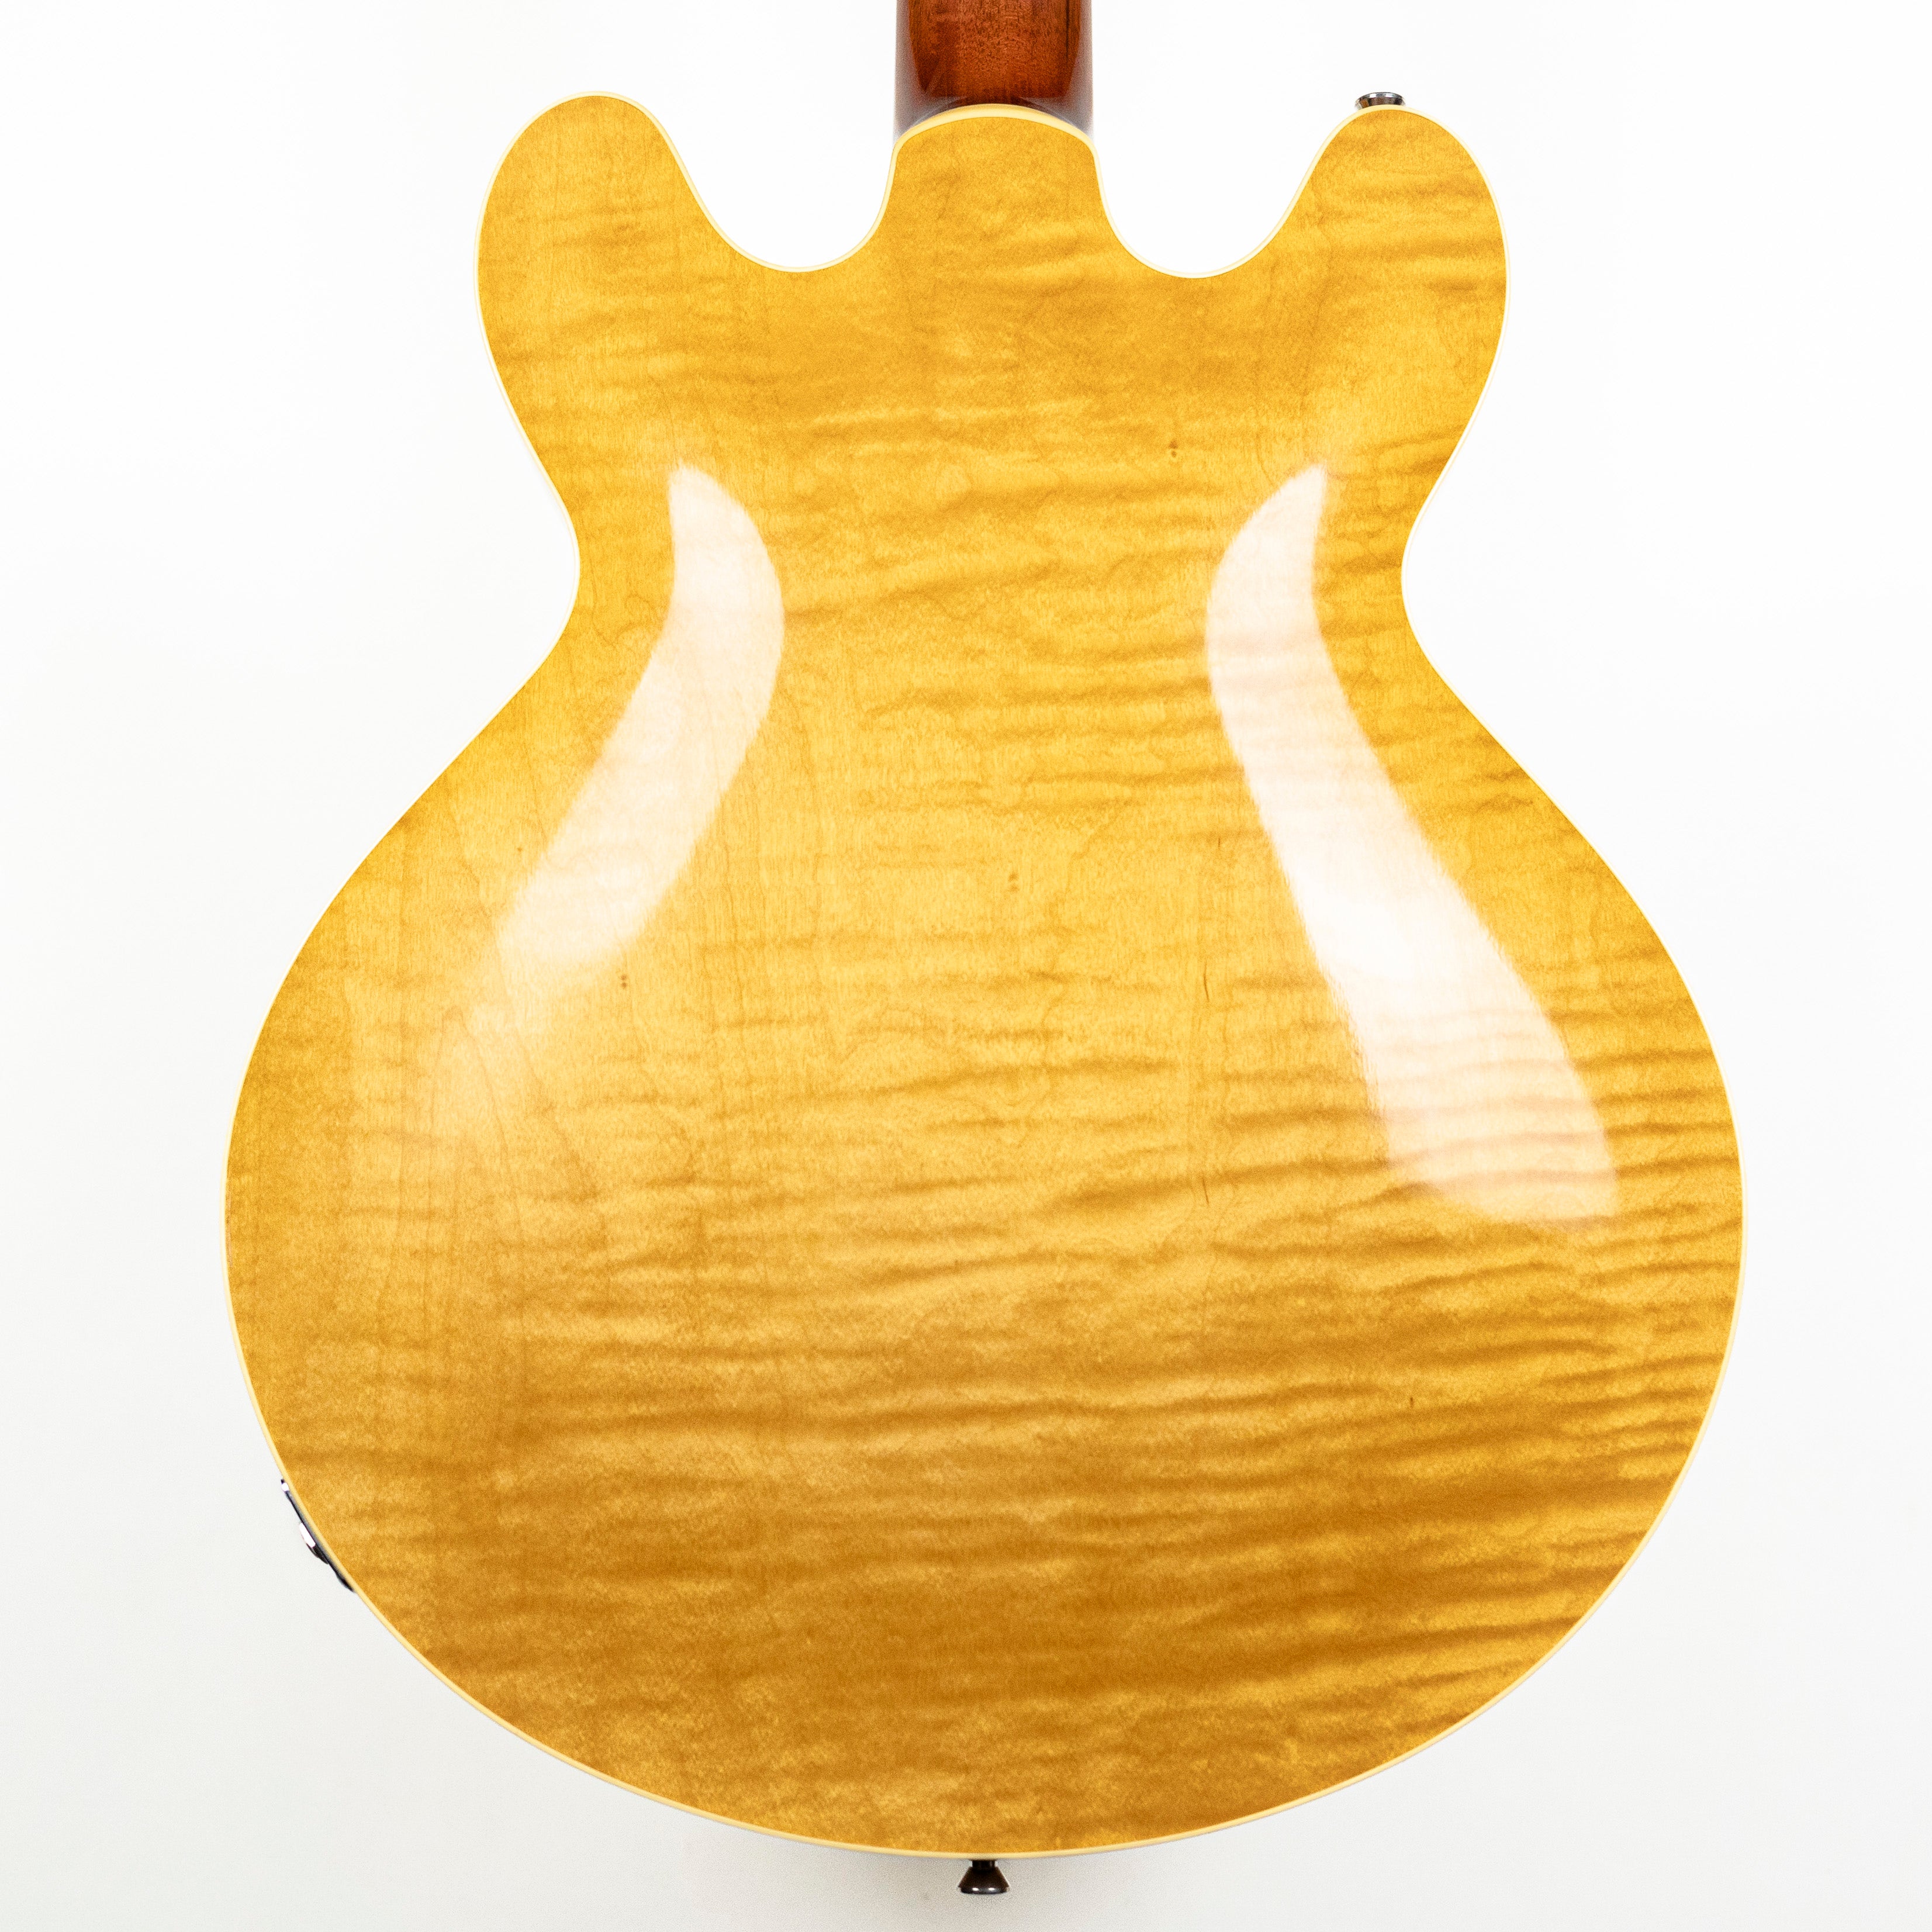 Collings 2012 I-35 LC Blonde